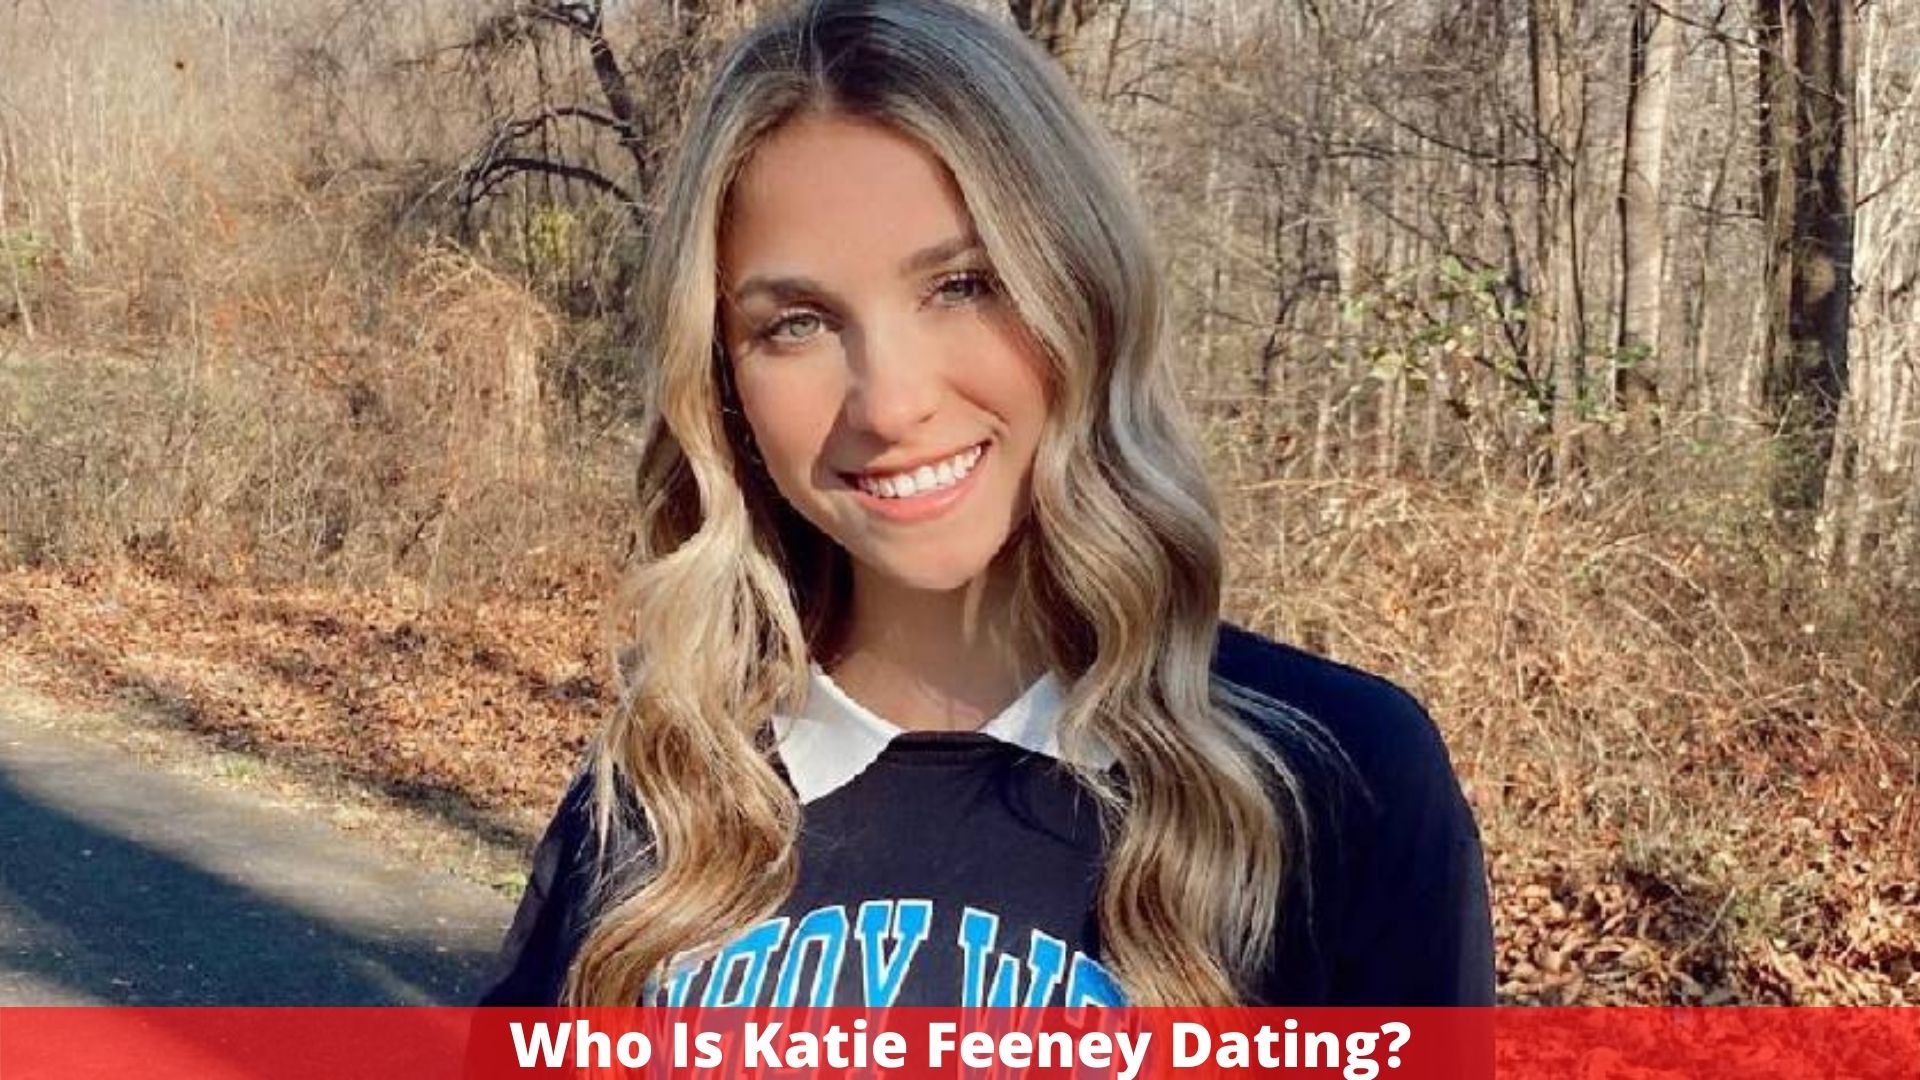 Who Is Katie Feeney Dating? Are Katie Feeney And Sean Still Together Or Did They End Thing?